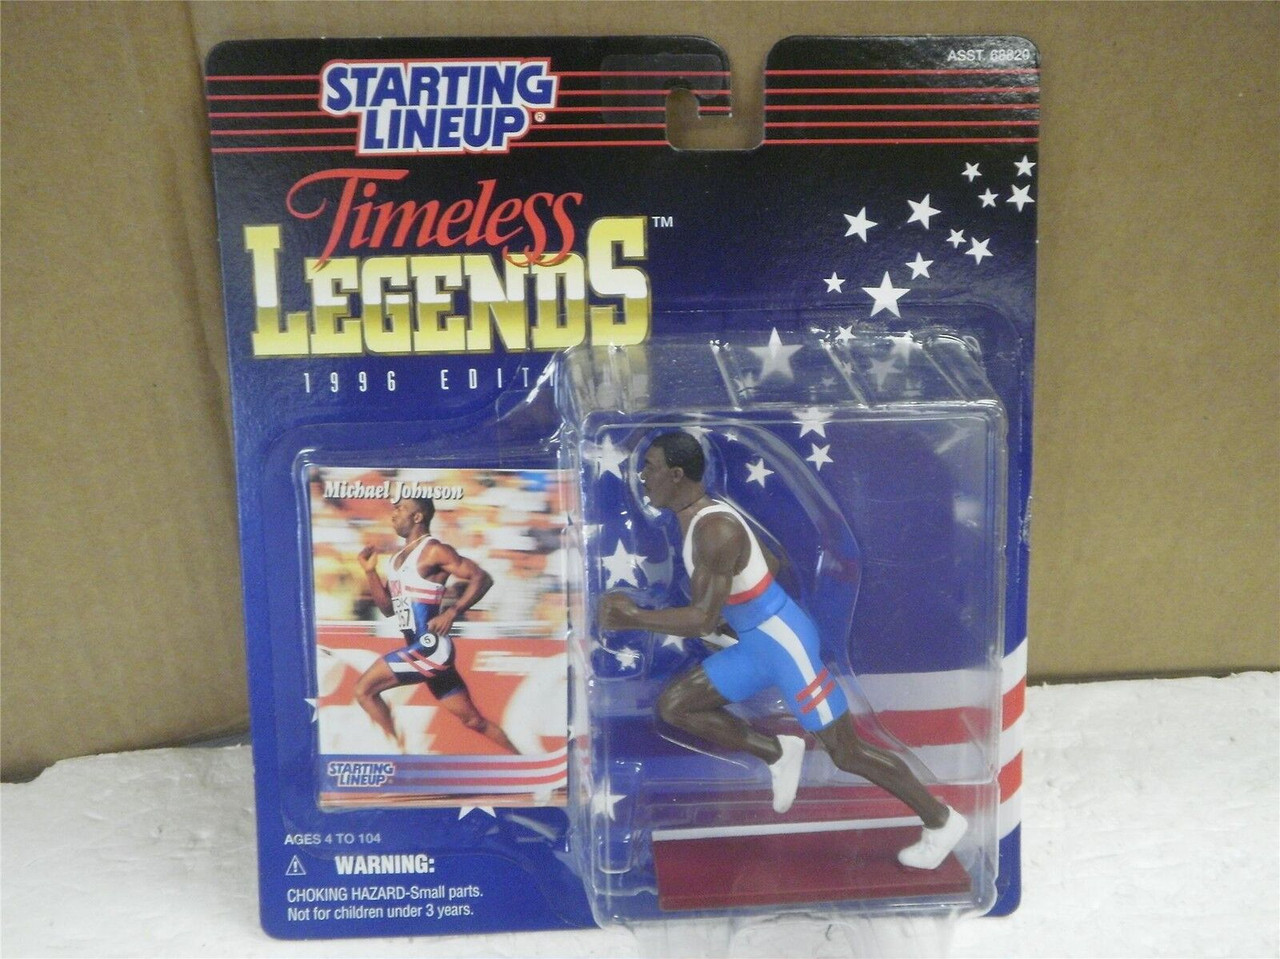 STARTING LINEUP TIMELESS LEGENDS 1996- MICHAEL JOHNSON- NEW-TRACK- L156  The Model Train Store of New Jersey Lionel Trains